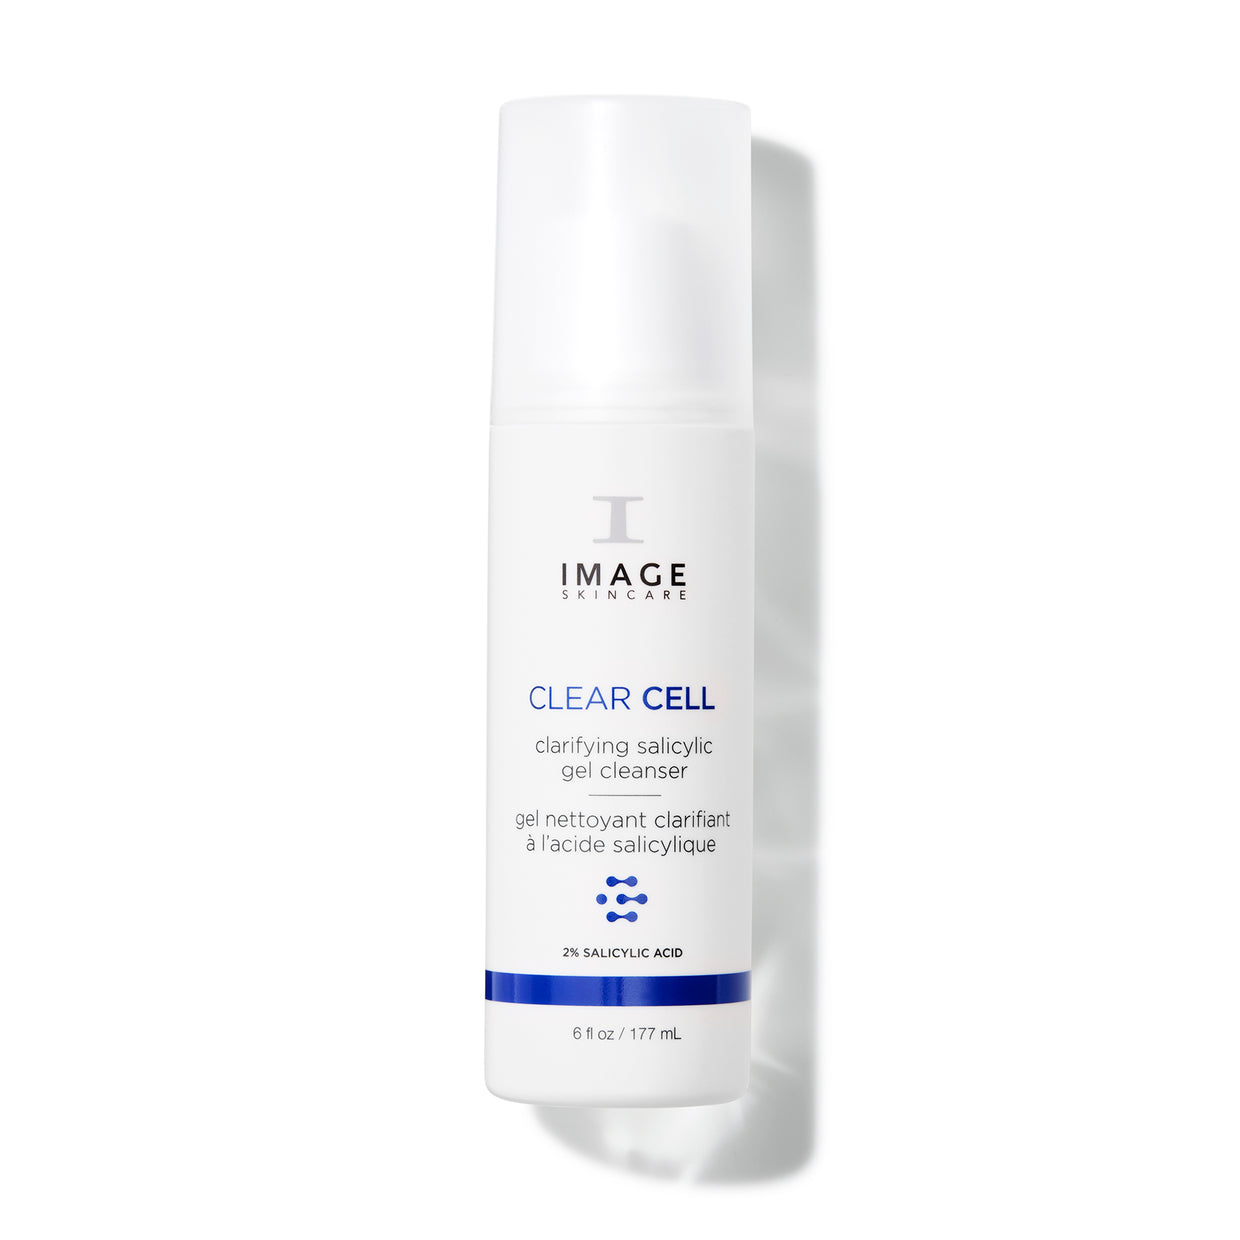 Image Skincare Clear Cell Clarifying Salicylic Acid Gel Cleanser Shop At Exclusive Beauty